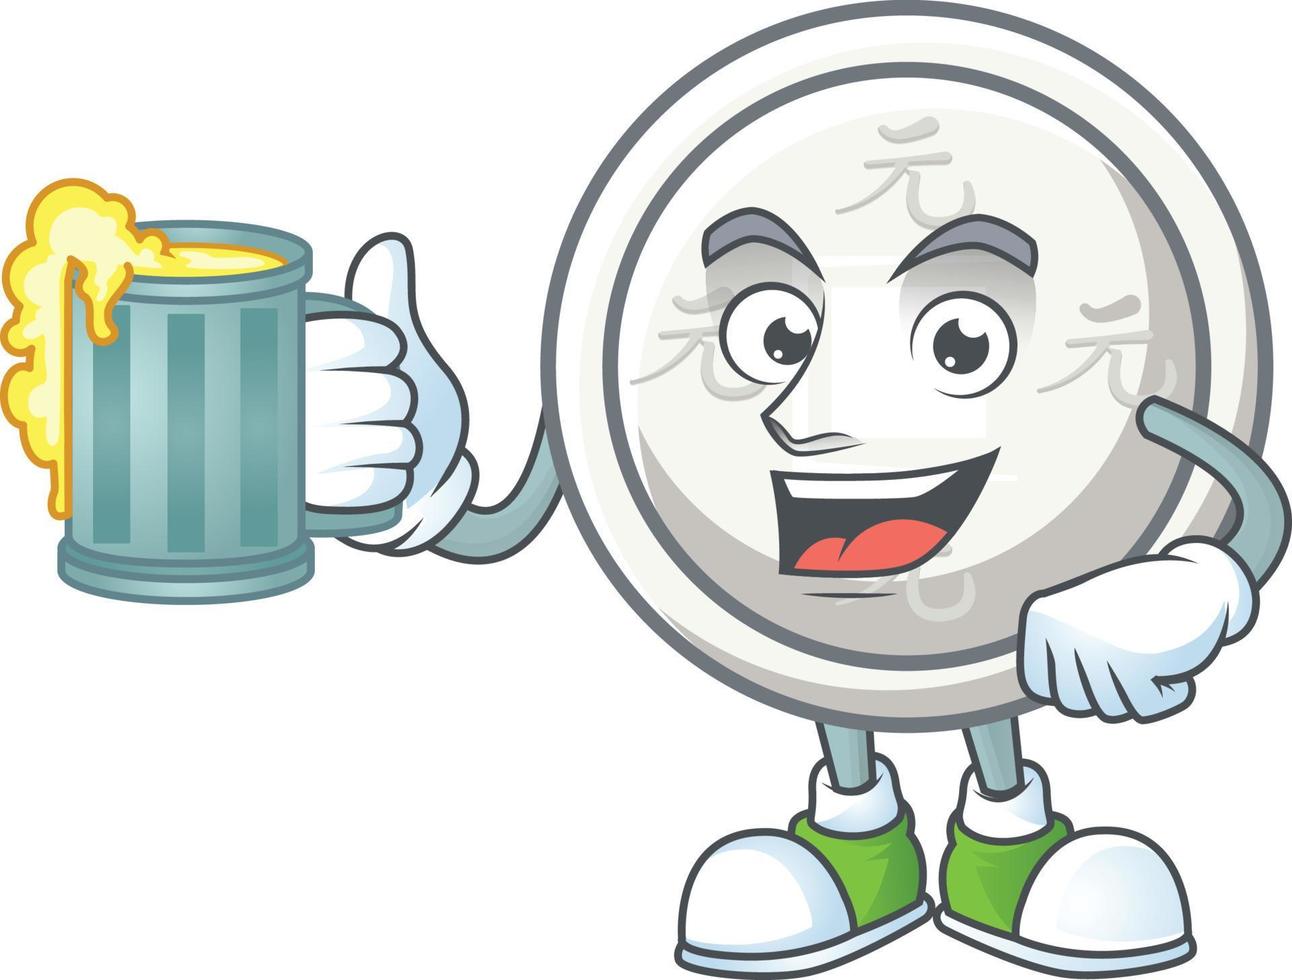 Chinese silver coin cartoon character style vector